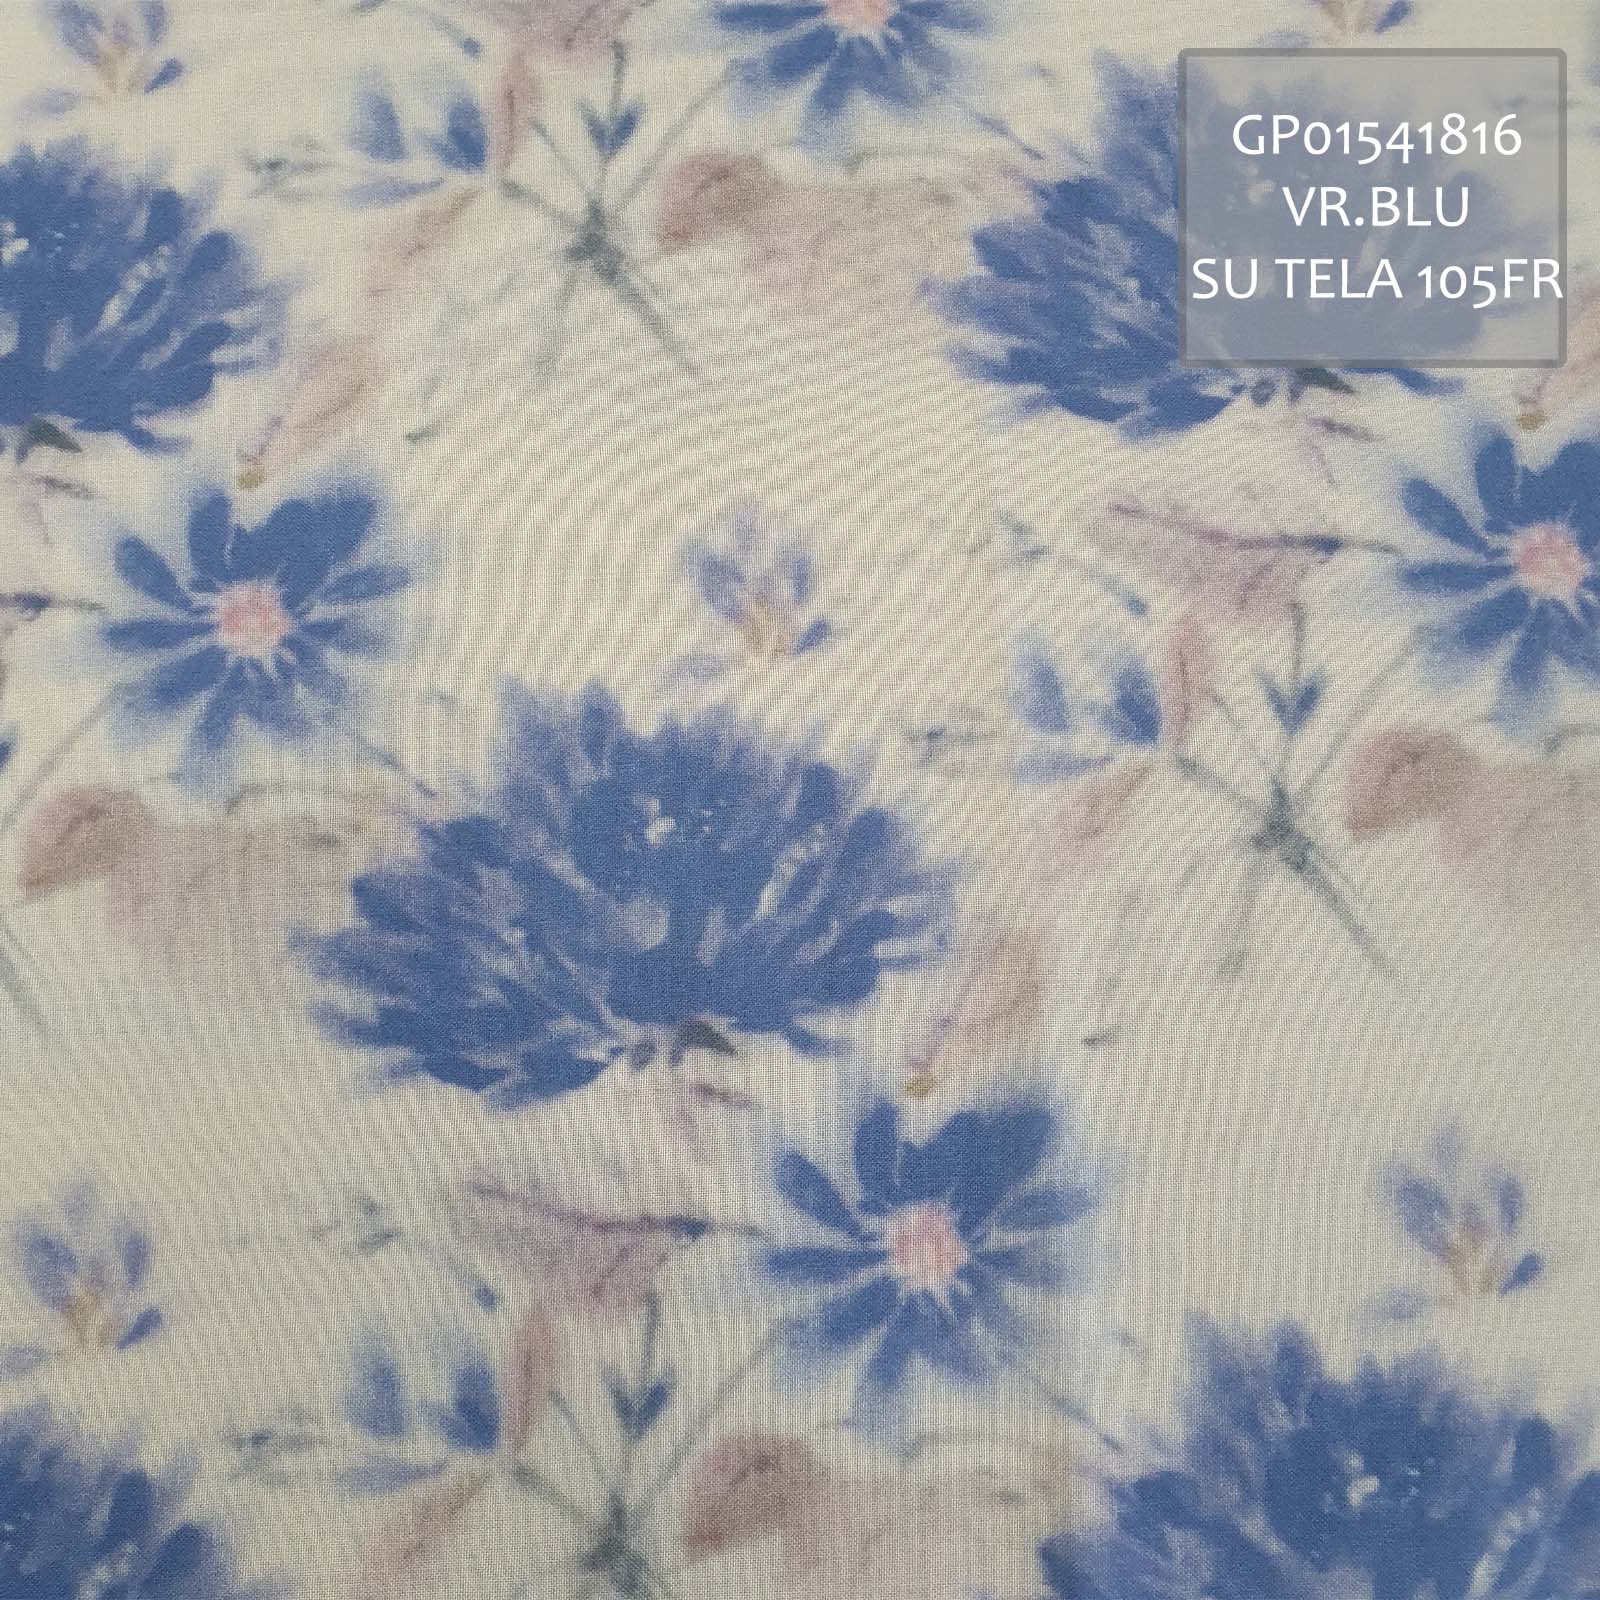 fabric print with digital pigment colourant, flowers style on canvas105 fr textile<br /> 100% Made in Italy fabric. Style classic with flowers decorations.

 Treatments: soft standard. Type of workings: digital print and pigment print. 